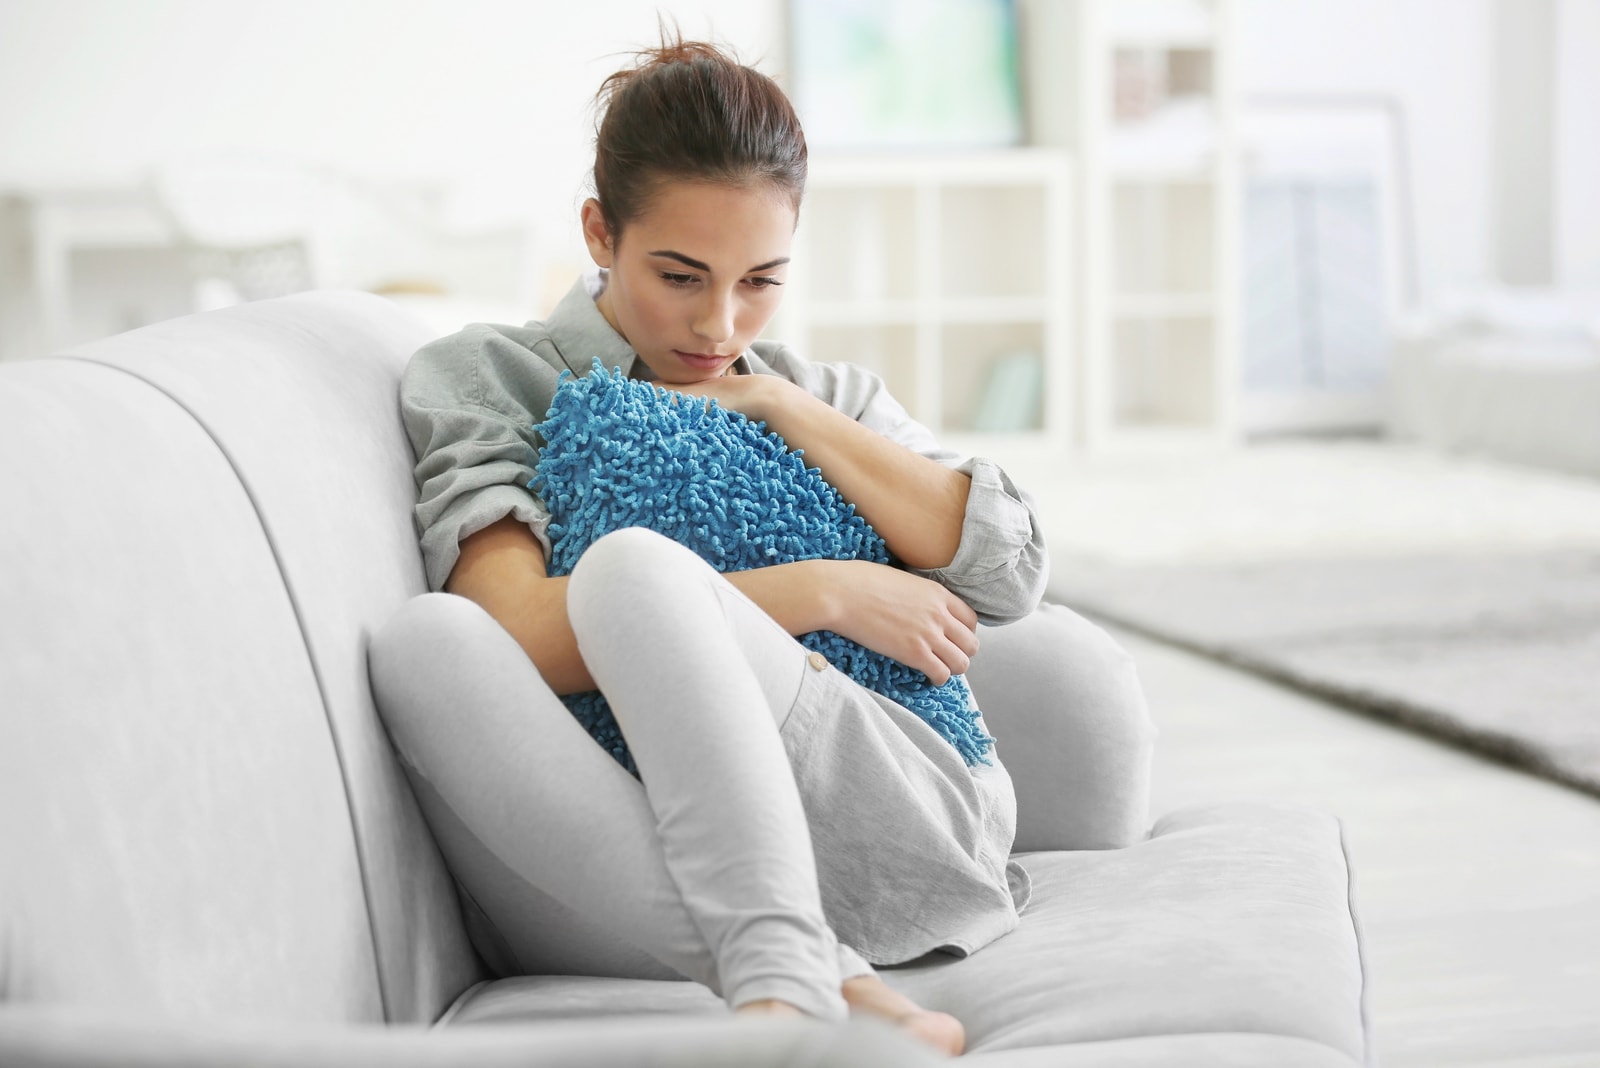 sad woman sitting on the couch and hugging pillow